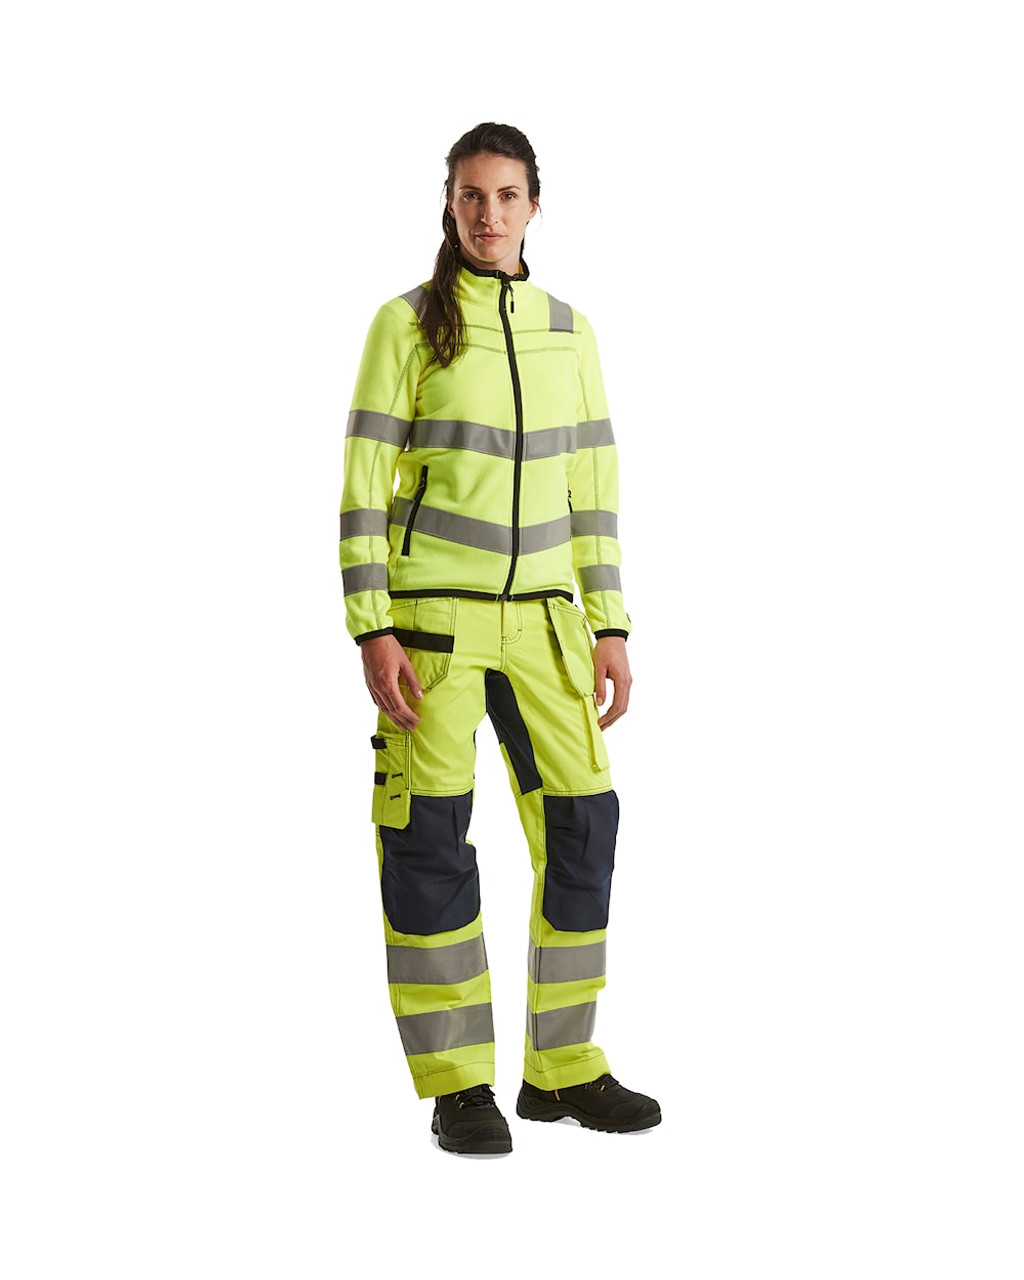 BLAKLADER Hoodie  4966  with  for BLAKLADER Hoodie  | 4966 Womens High Vis Yellow Full Zip Hoodie with Reflective Tape Polyester Fleece that have Full Zip  available in Australia and New Zealand